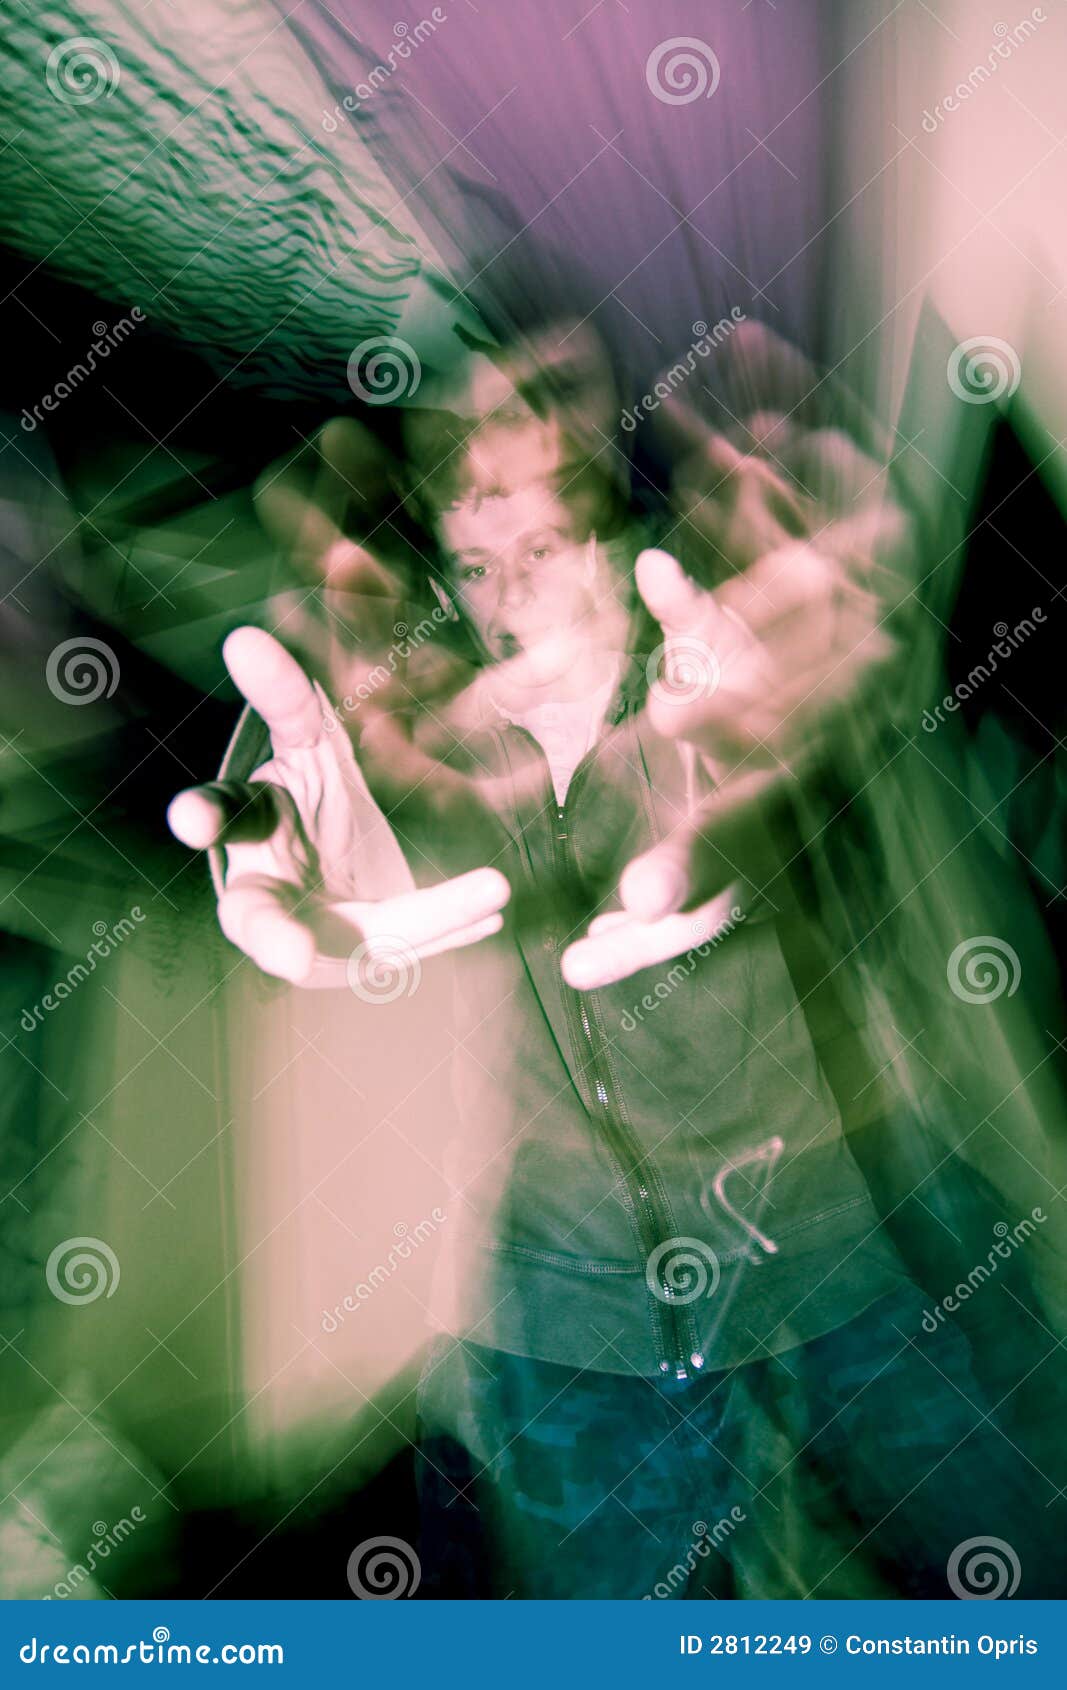 Vision Distorted by Drinking Stock Image - Image of distort